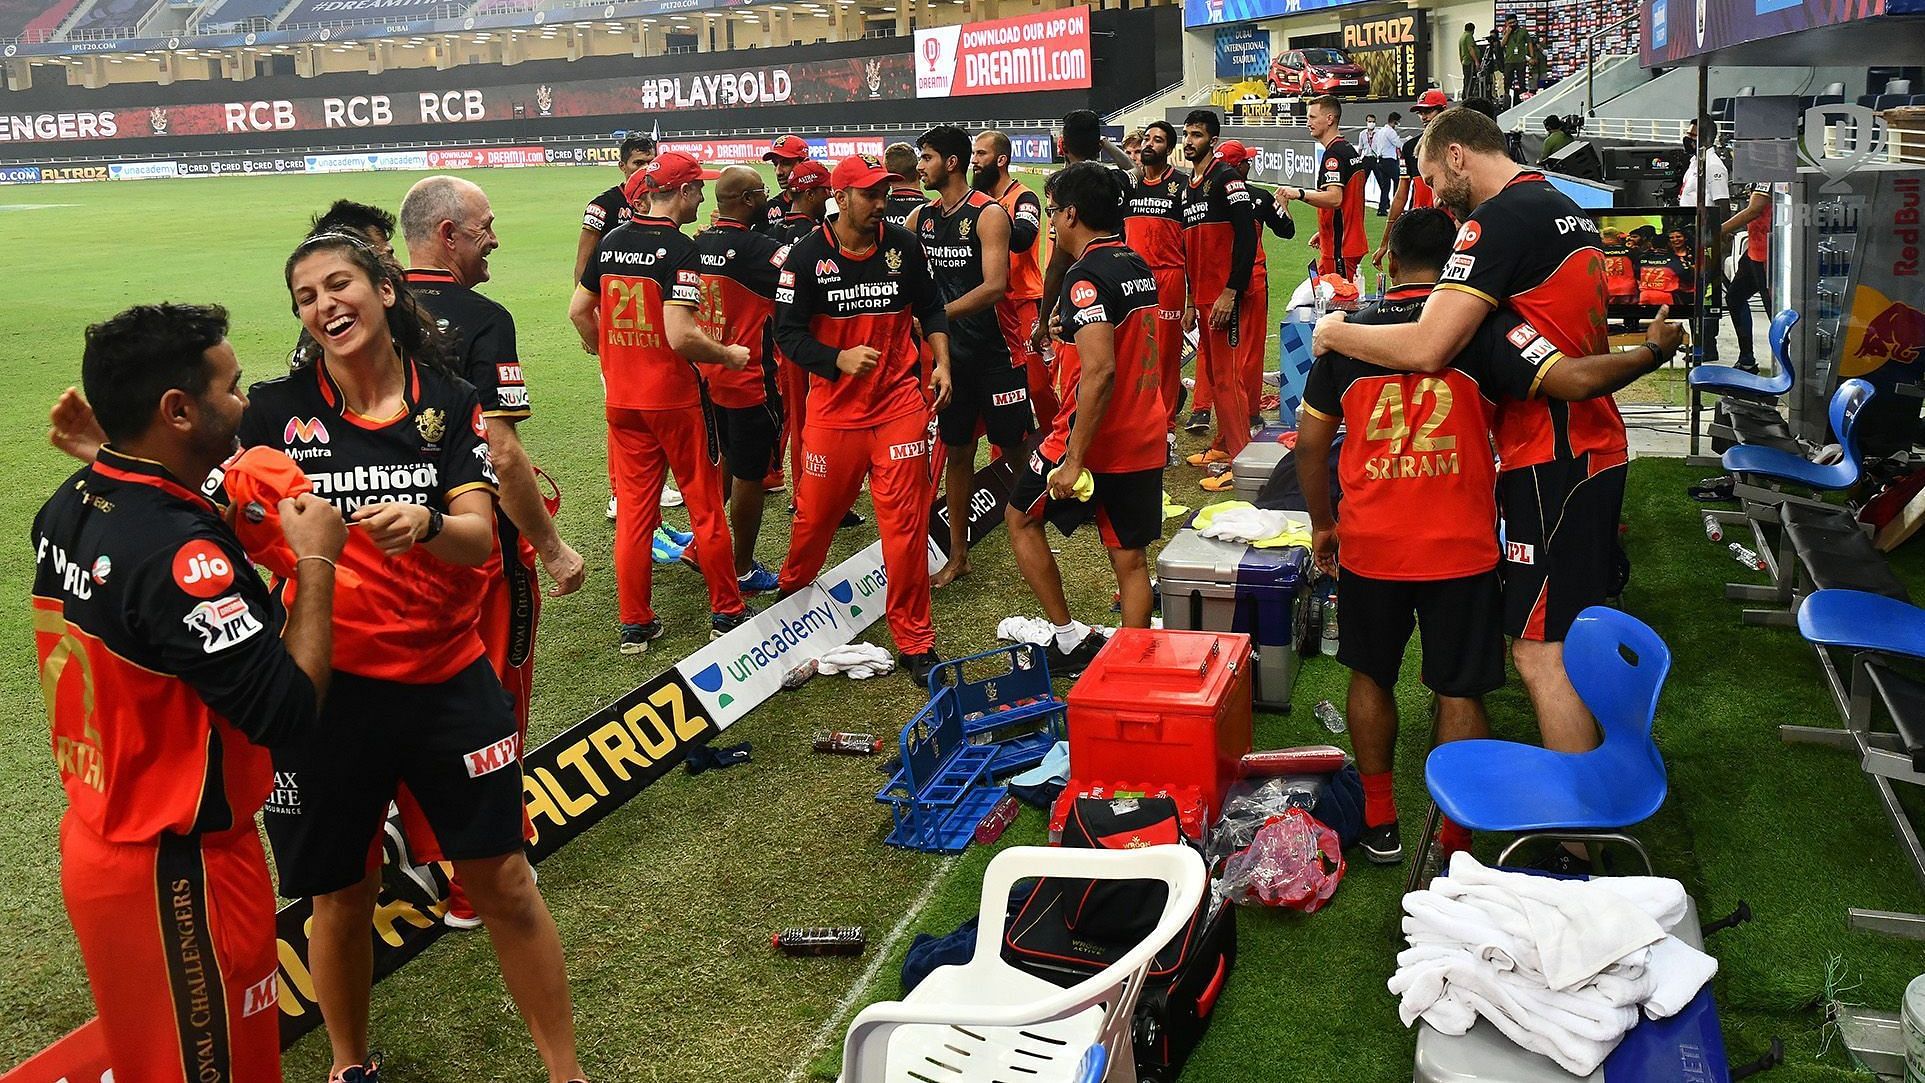 Royal Challengers Bangalore announced in October last year that Navnita Gautam from Canada will be their massage therapist for 2020 edition of IPL